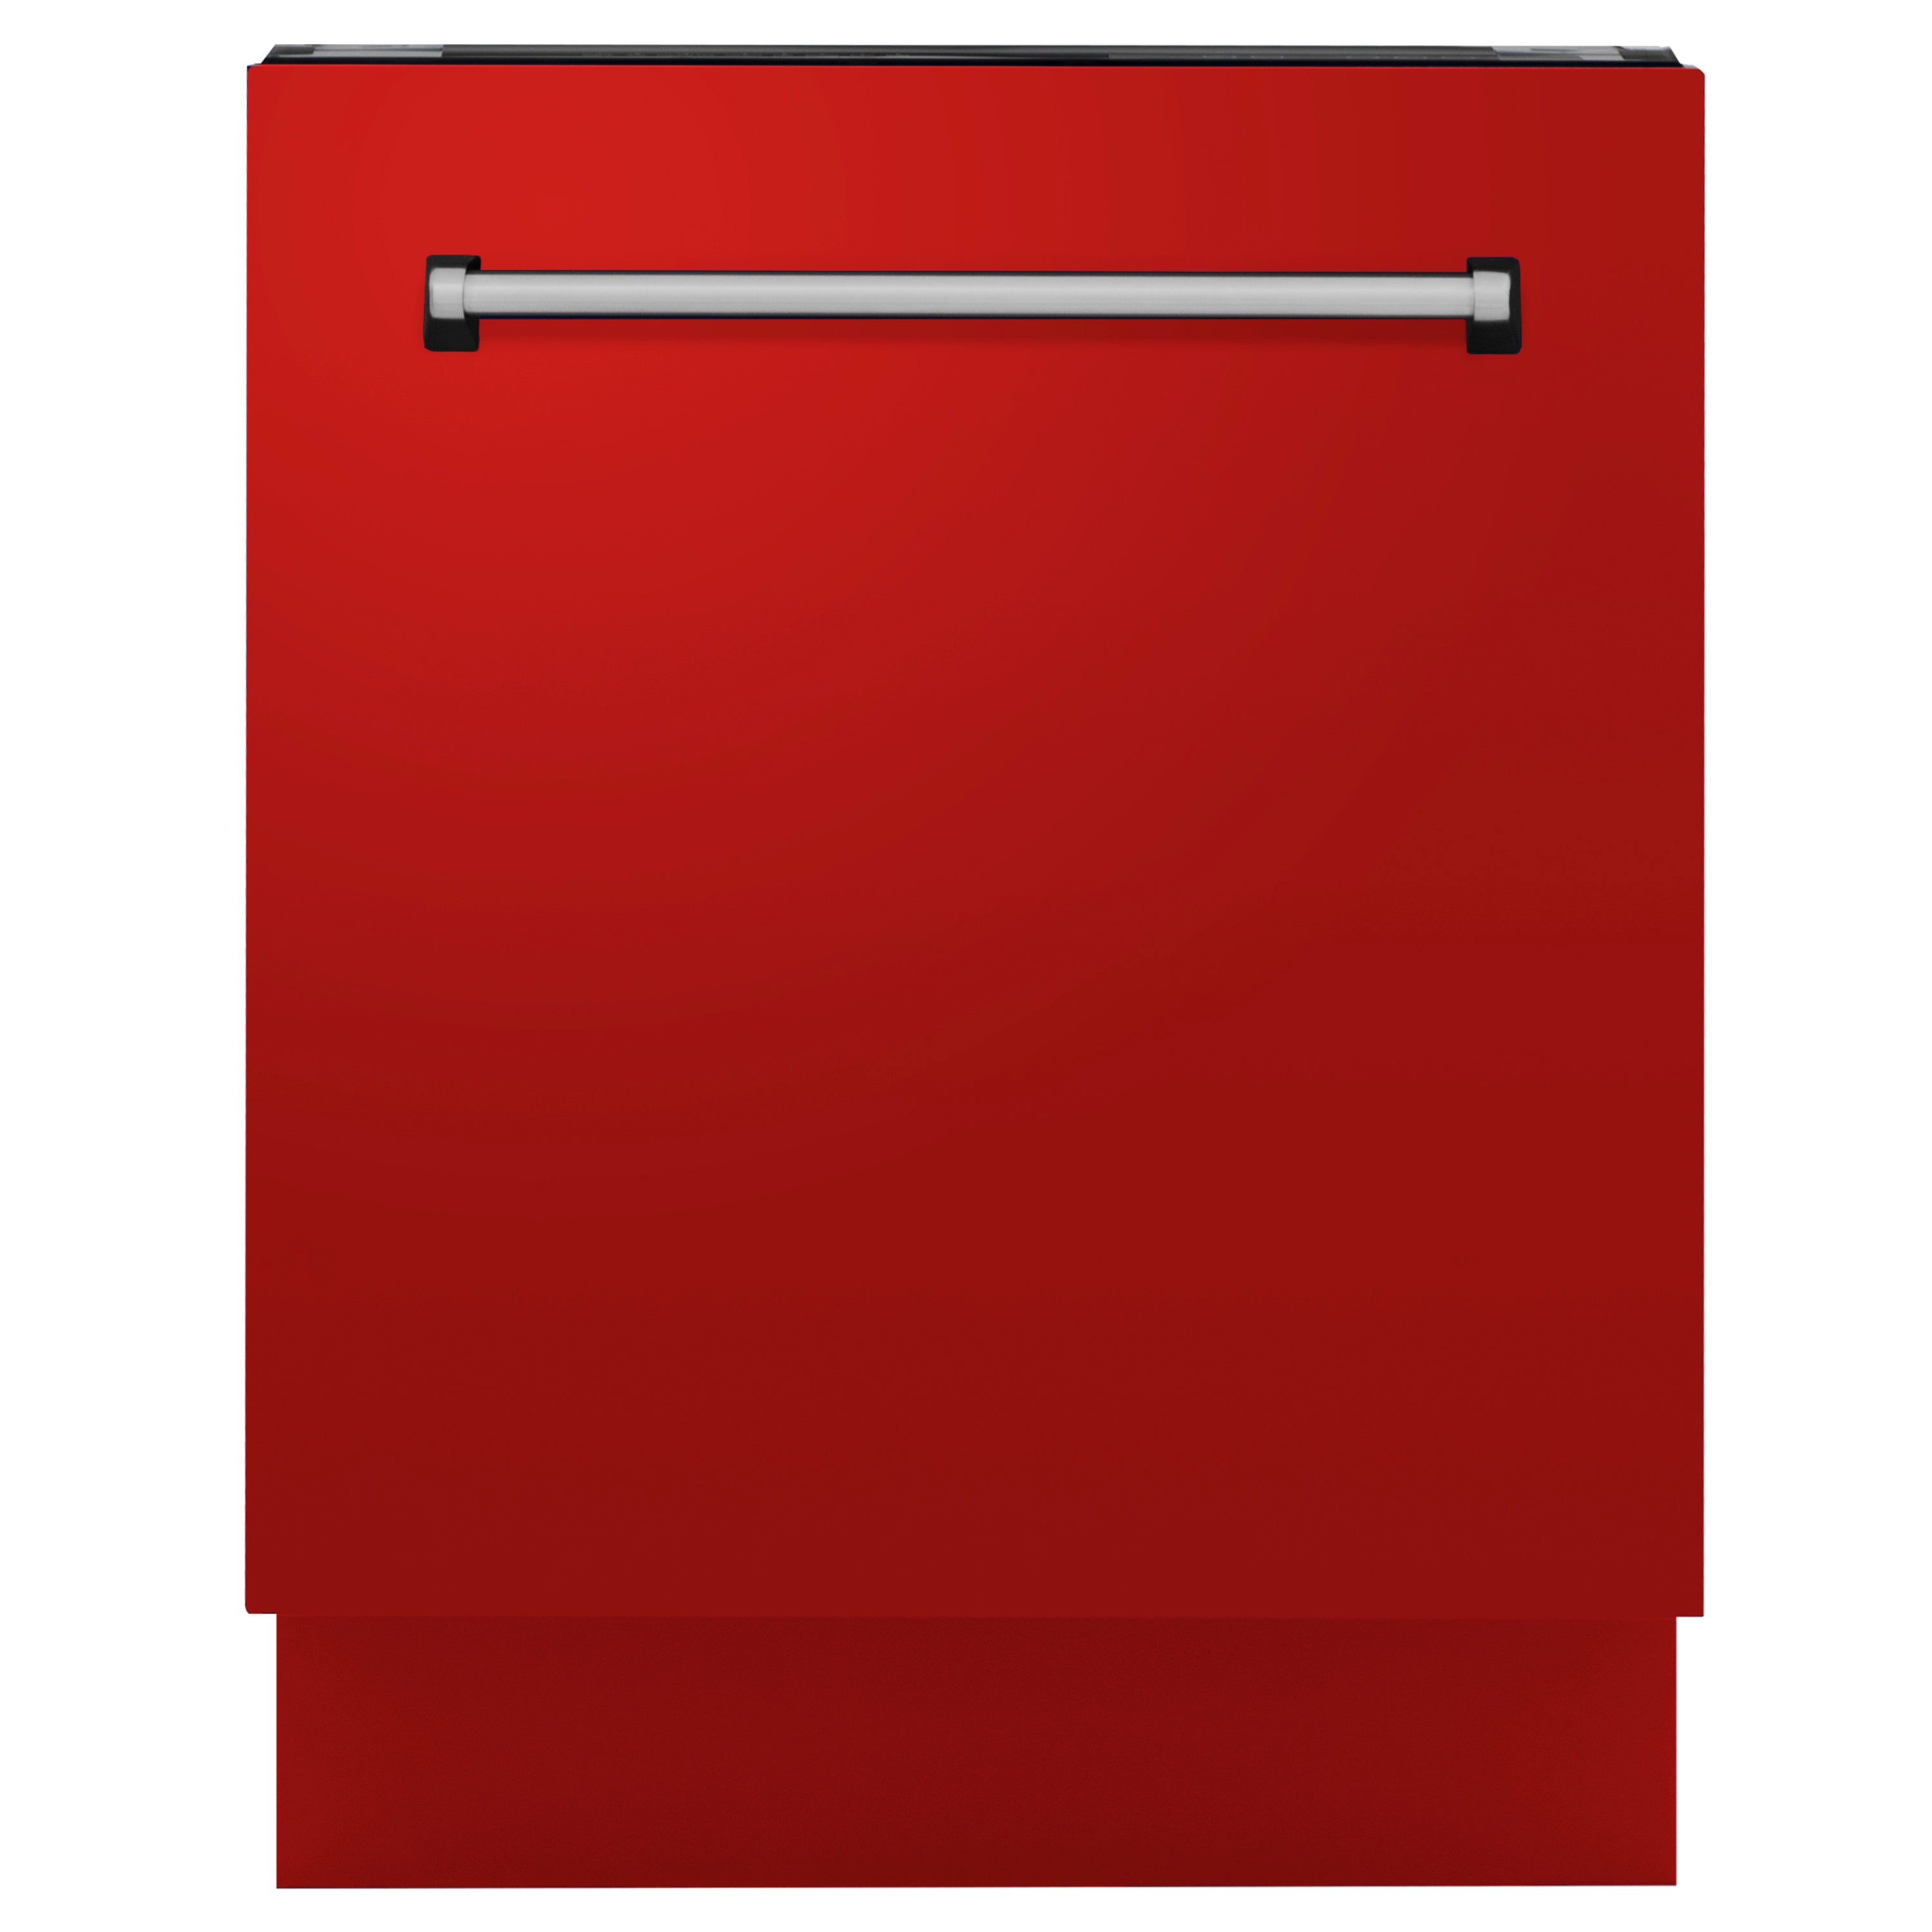 ZLINE 24" Tallac Series 3rd Rack Dishwasher with Red Matte Panel and Traditional Handle, 51dBa (DWV-RM-24)